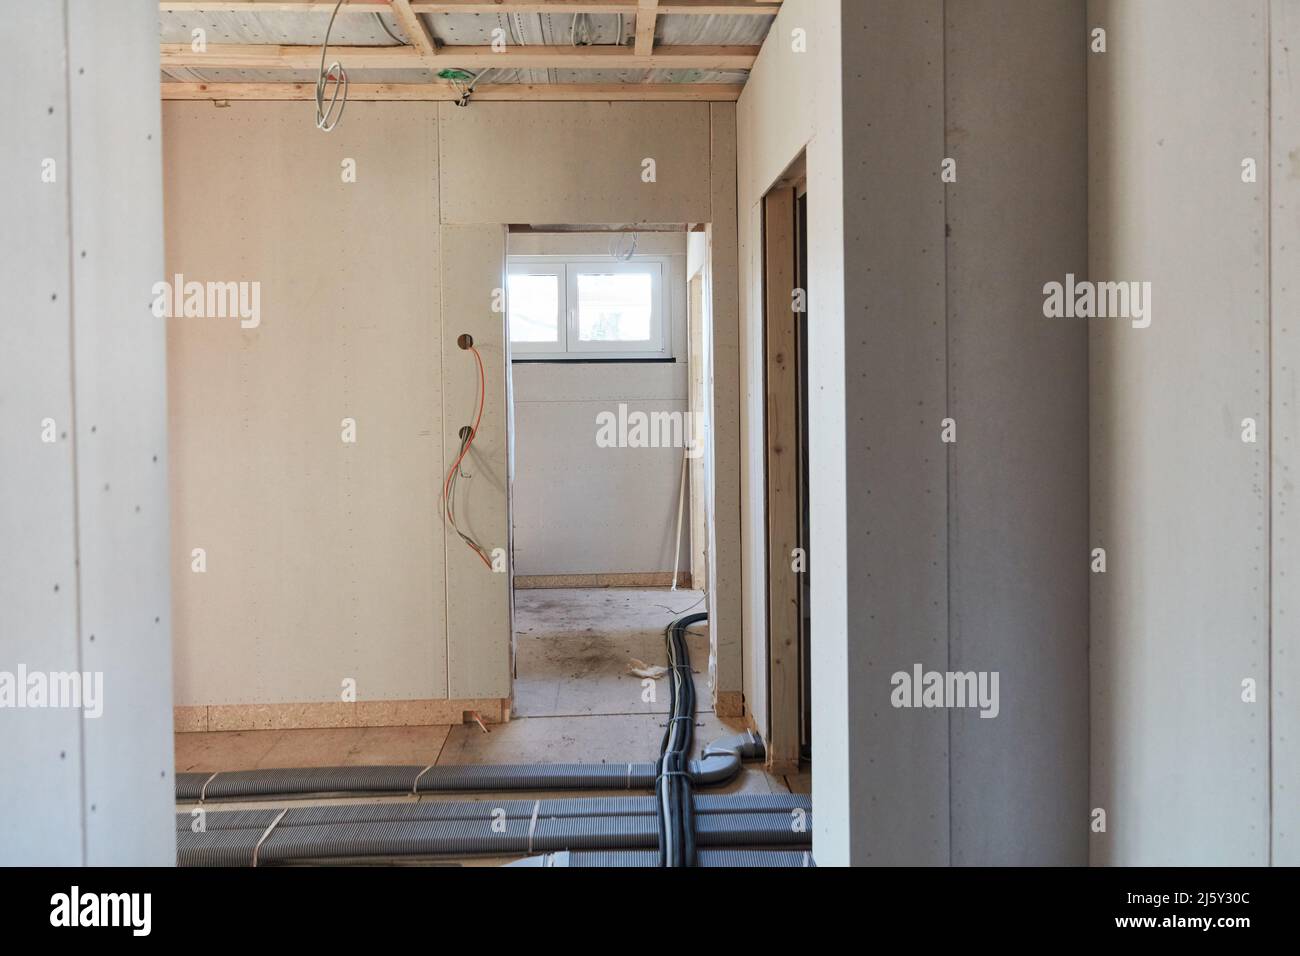 Hallway or corridor in house in new construction project with door opening Stock Photo